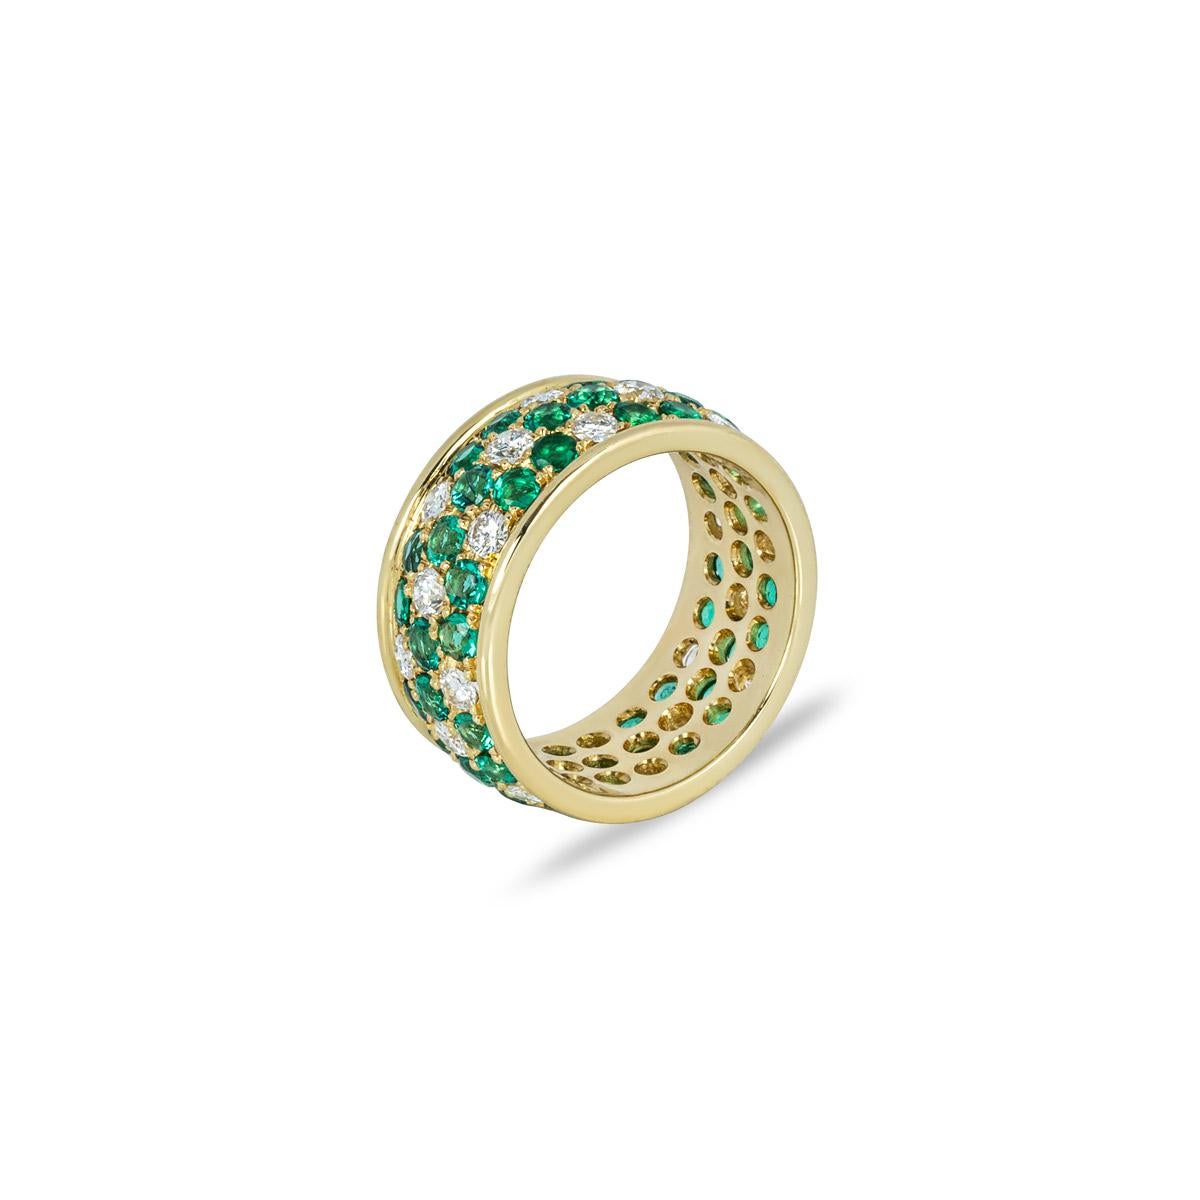 A whimsical 18k yellow gold emerald and diamond full eternity ring. The ring features 8 flower motifs each set with 6 round cut emeralds with an approximate total weight of 1.92ct and displaying a vibrant green hue. There are 24 round brilliant cut